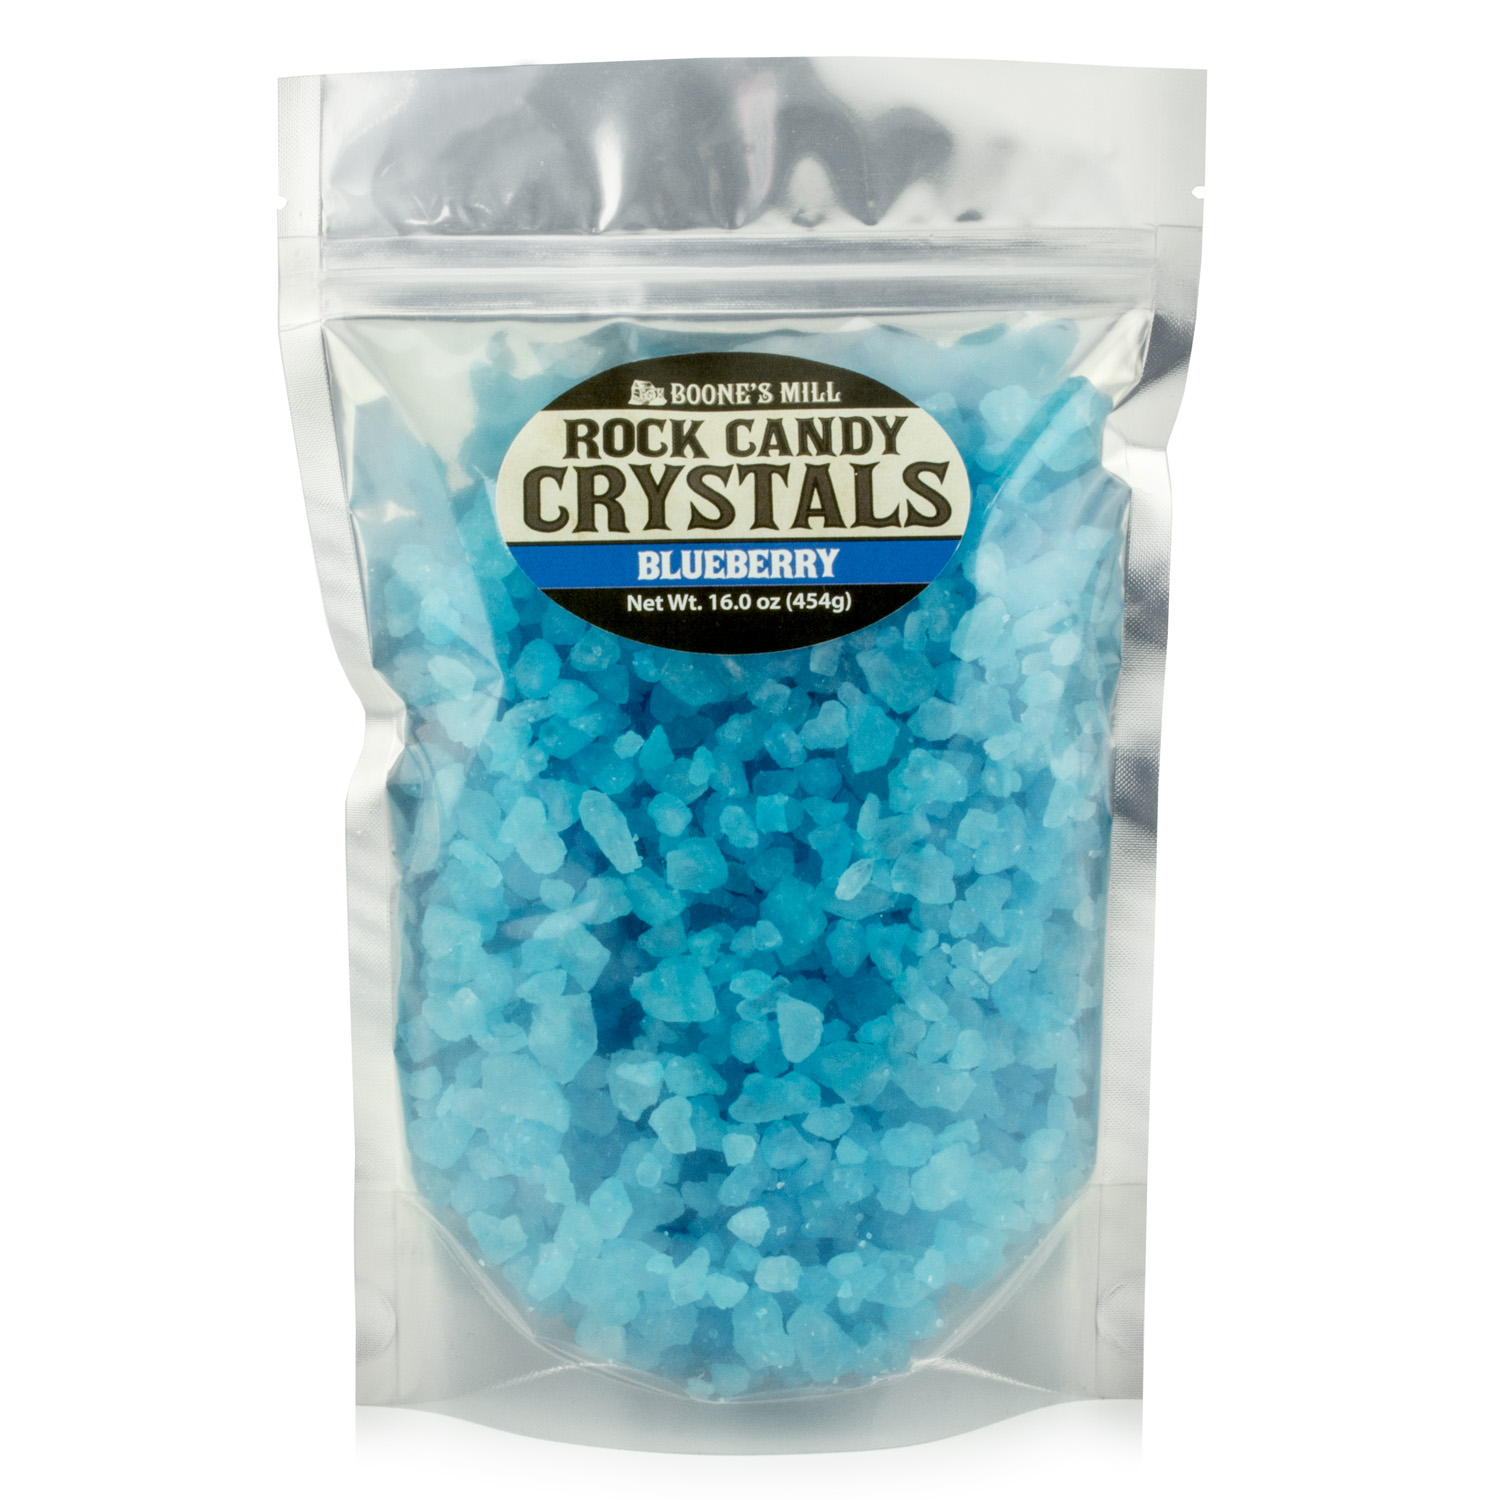 Rock Candy Crystals Light Blue/Blueberry 1 lb Resealable Bag